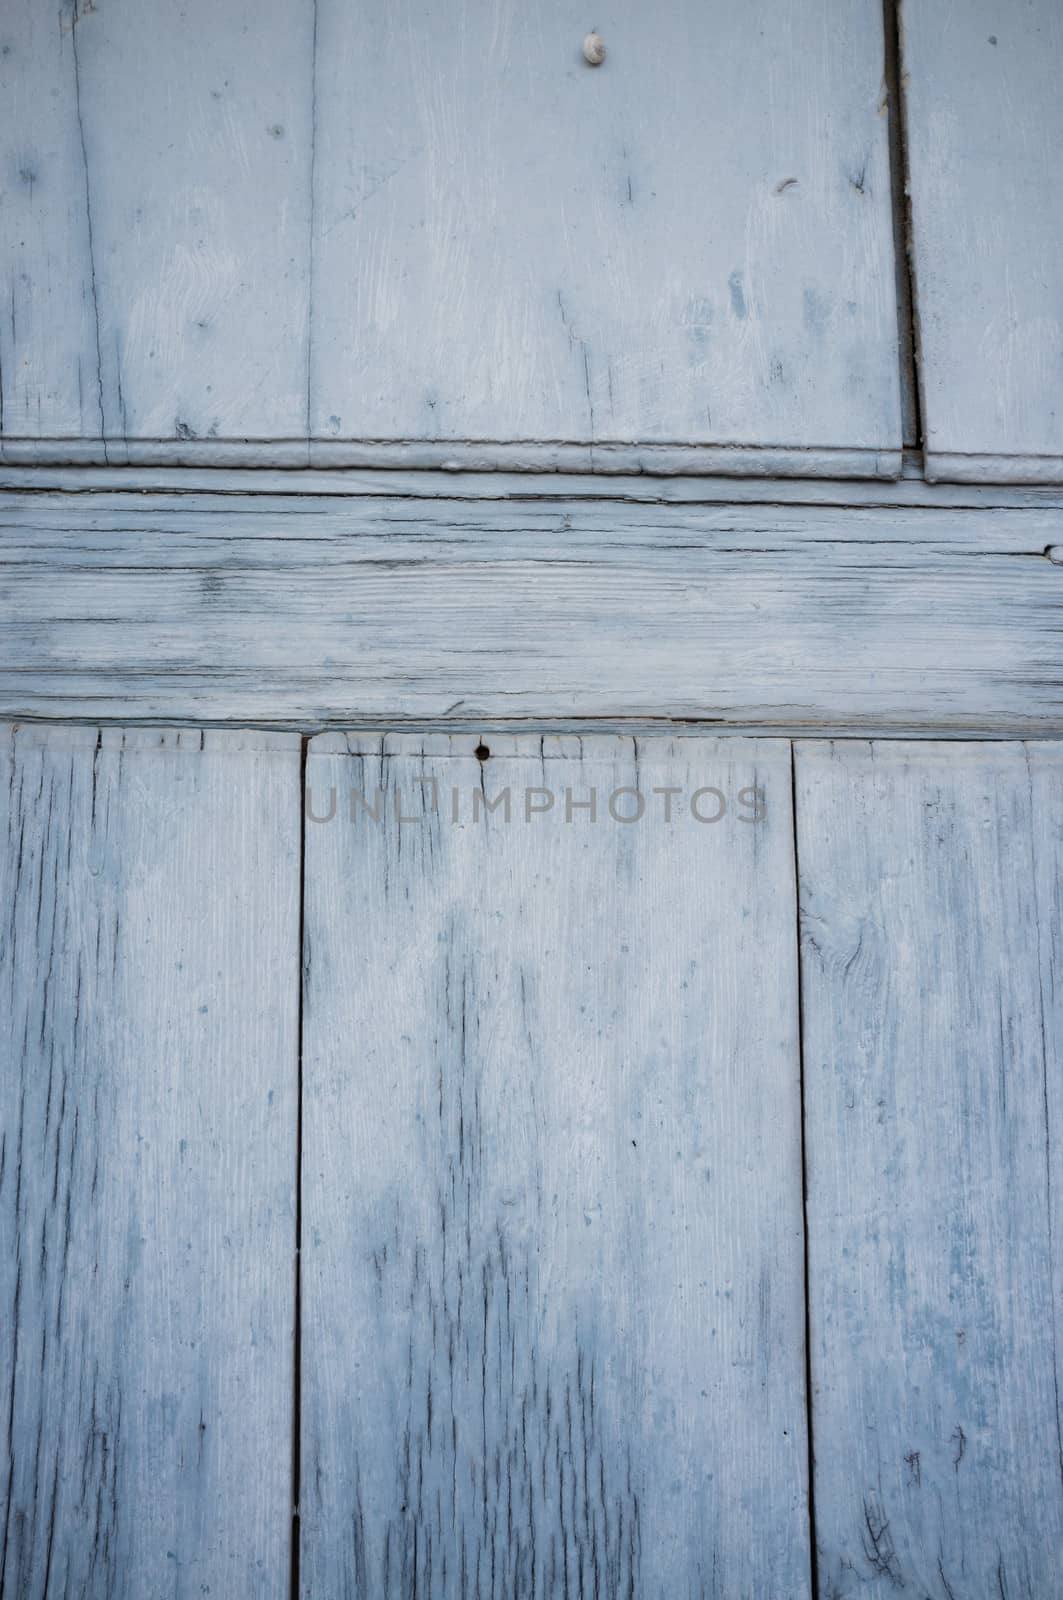 Weathered planks of an old blue wooden door